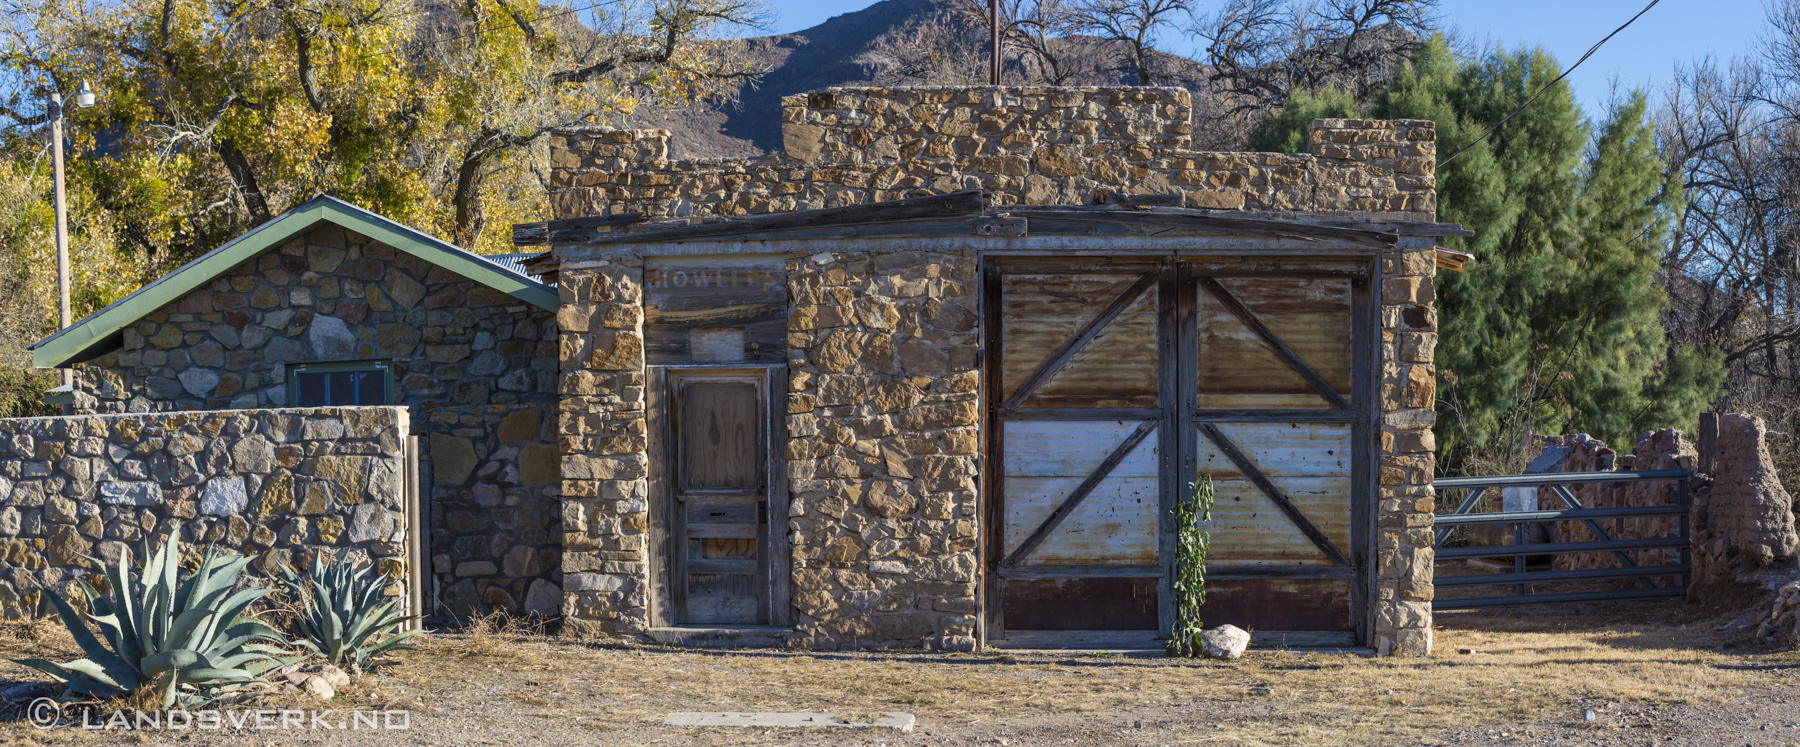 Shafter ghost town, Texas. 

(Canon EOS 5D Mark III / Canon EF 70-200mm f/2.8 L IS II USM)